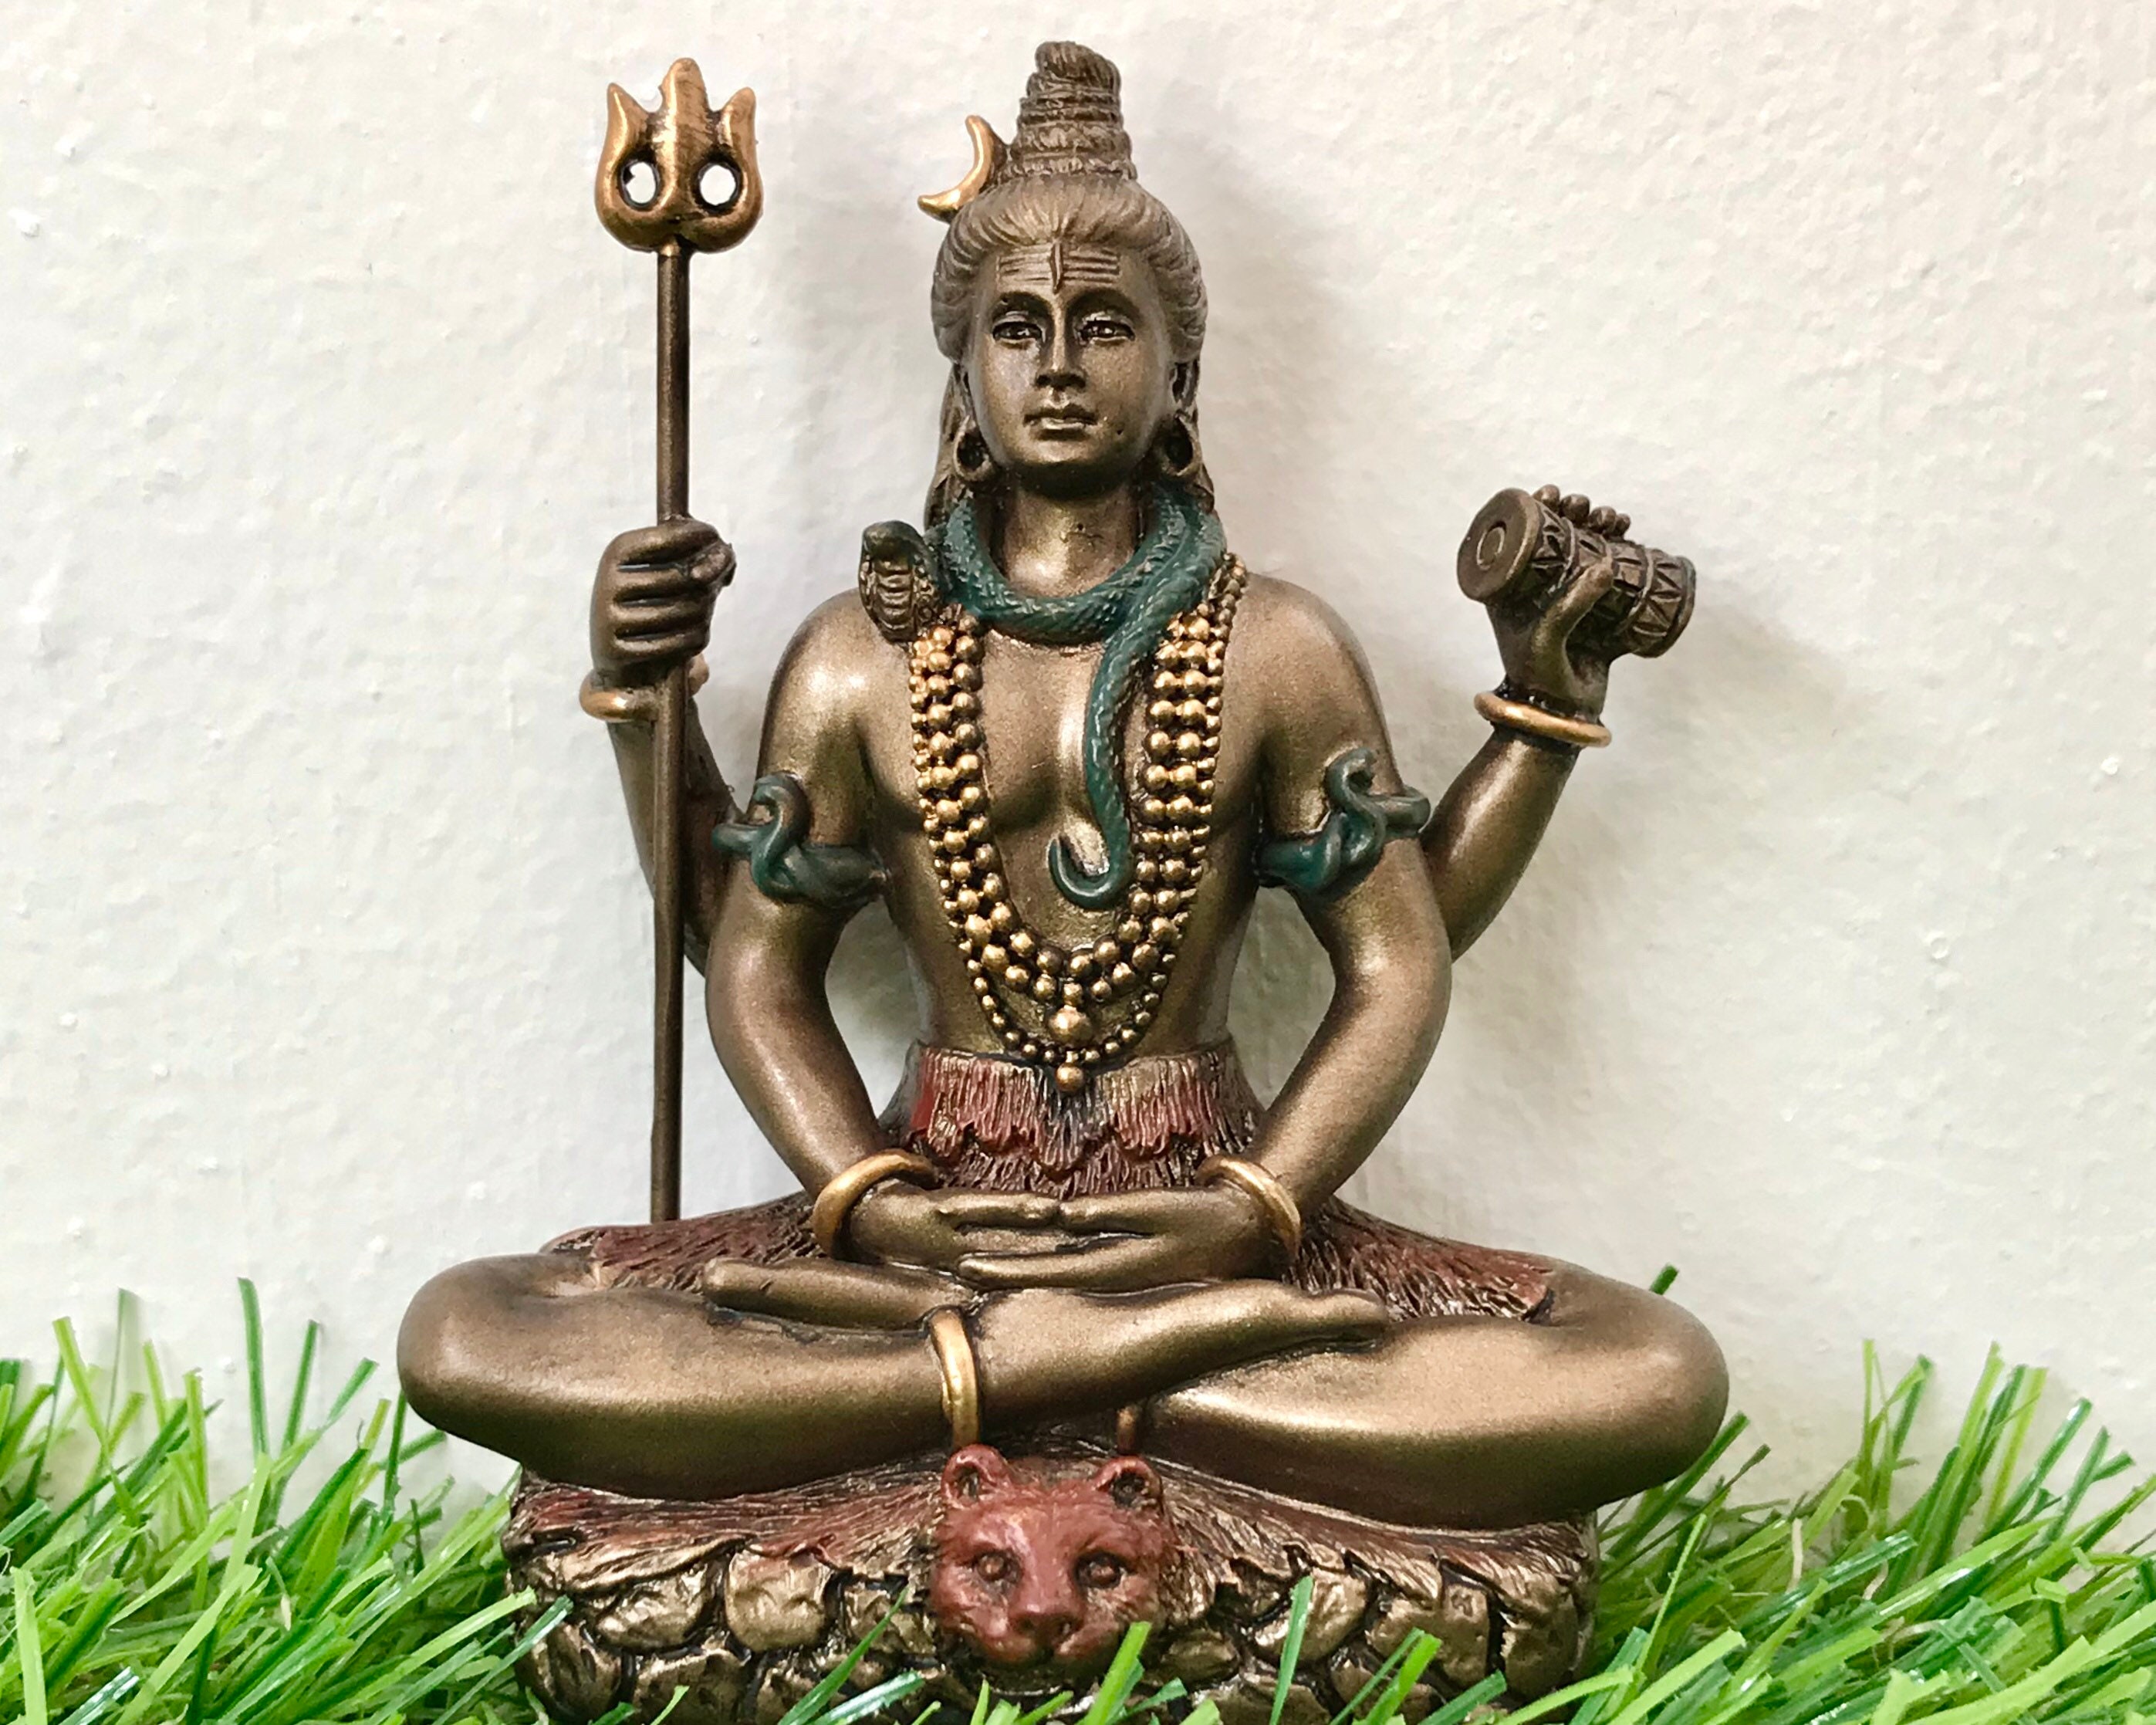 Buy Pure Brass Lord Shiva Statue, Made in India